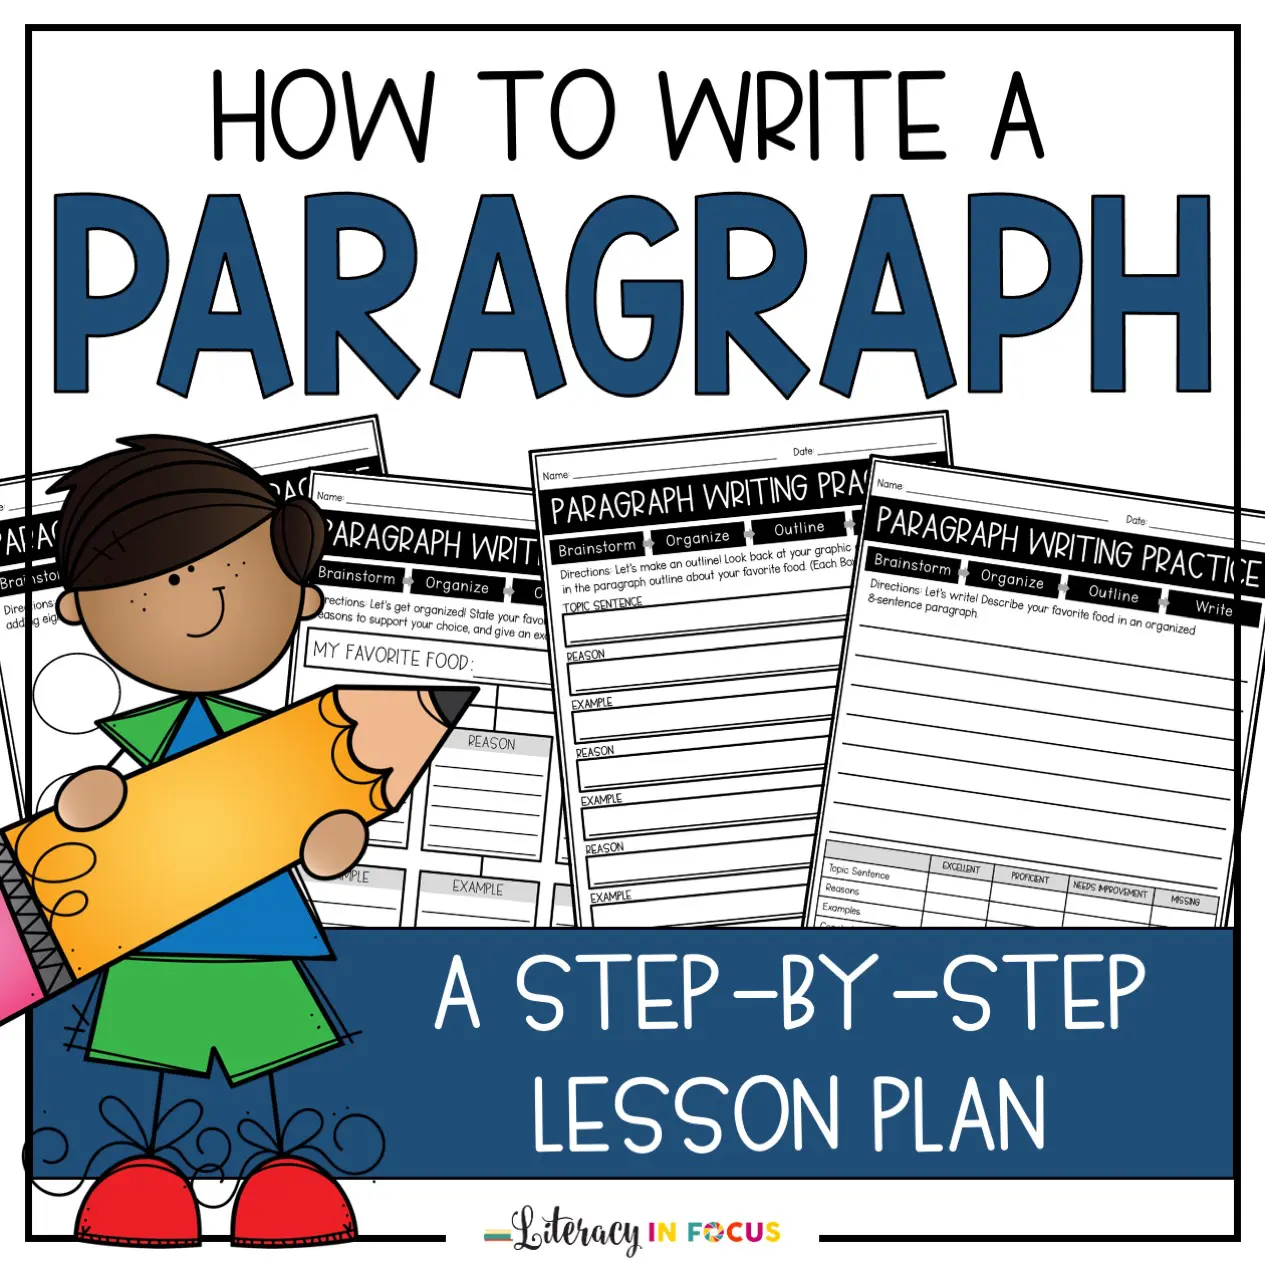 How to Write a Paragraph Step by Step Lesson Plan